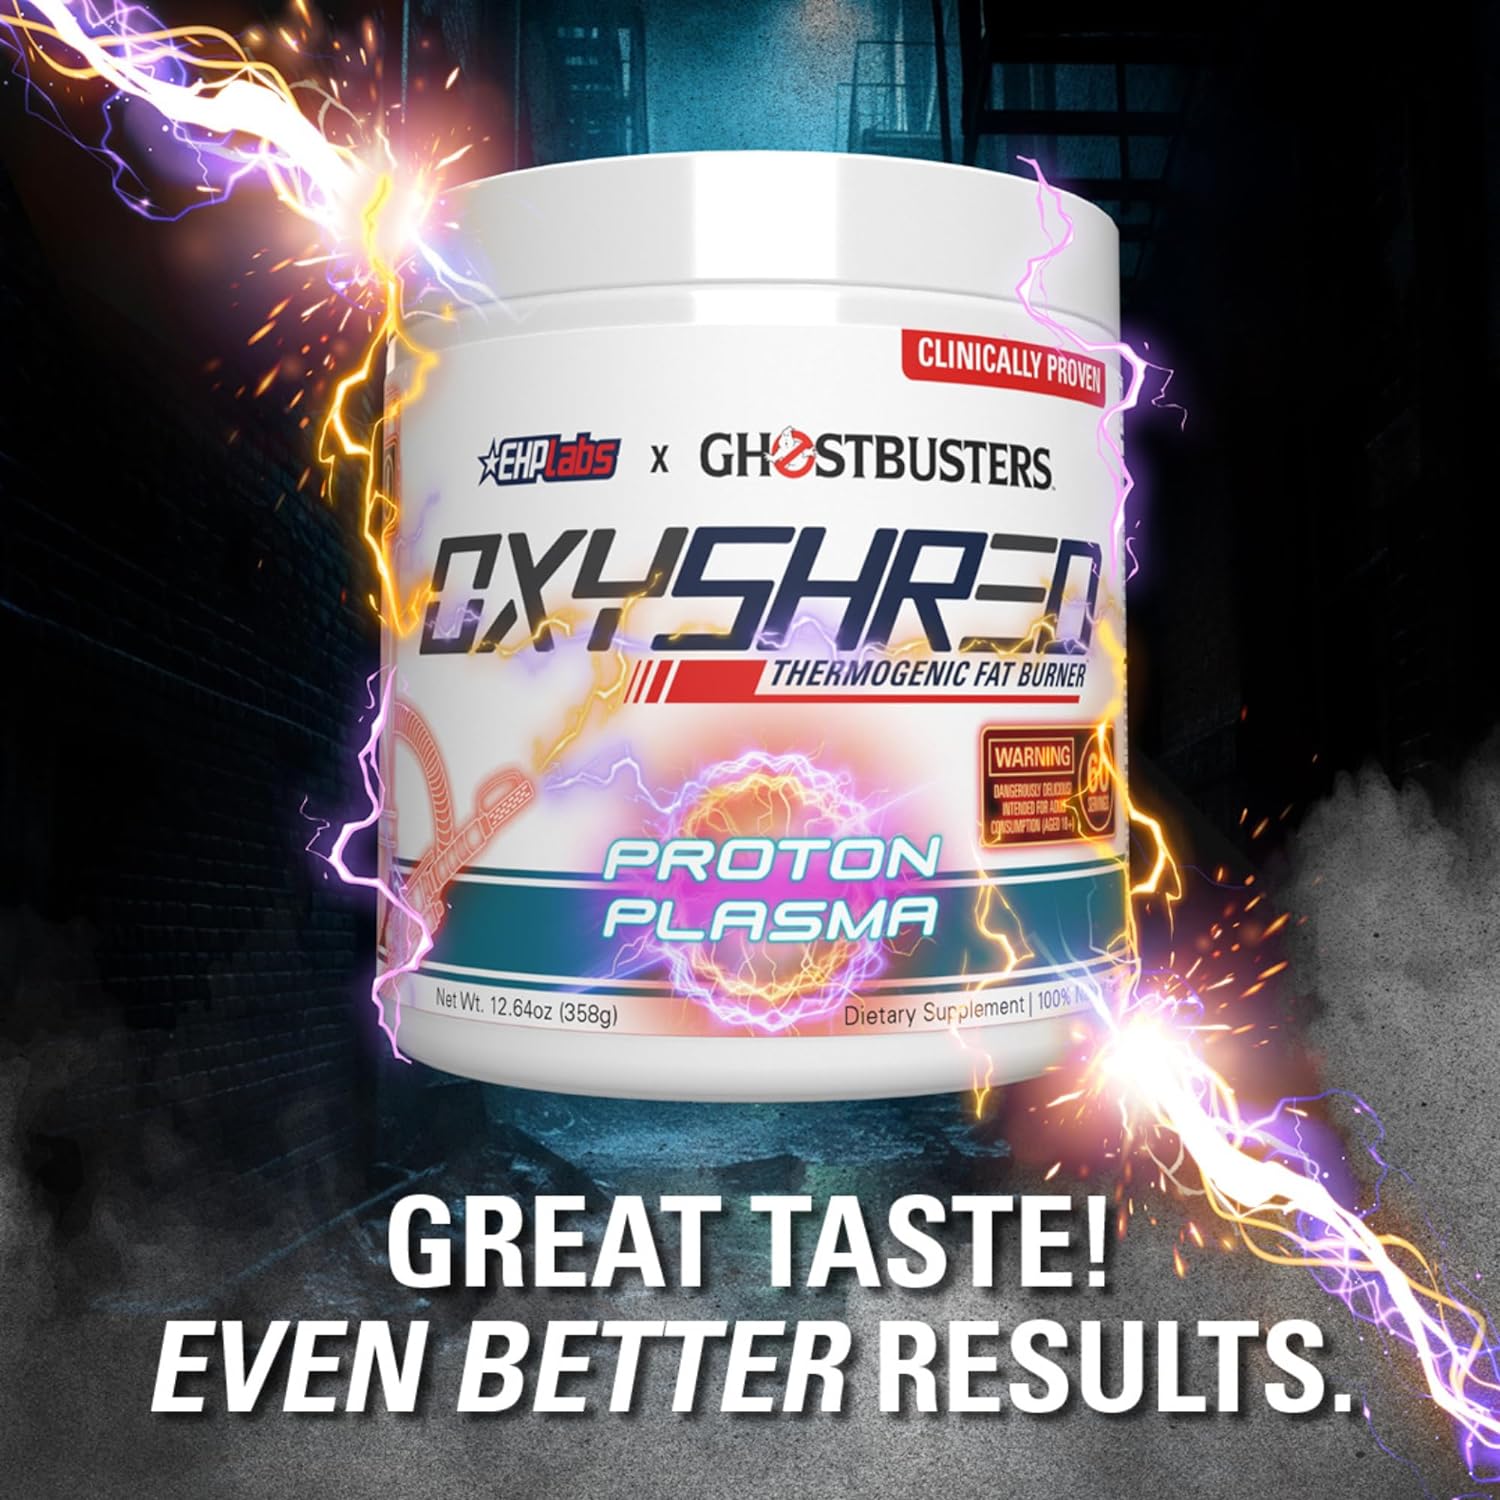 EHPlabs x Ghostbusters OxyShred Thermogenic Pre Workout Powder & Shred